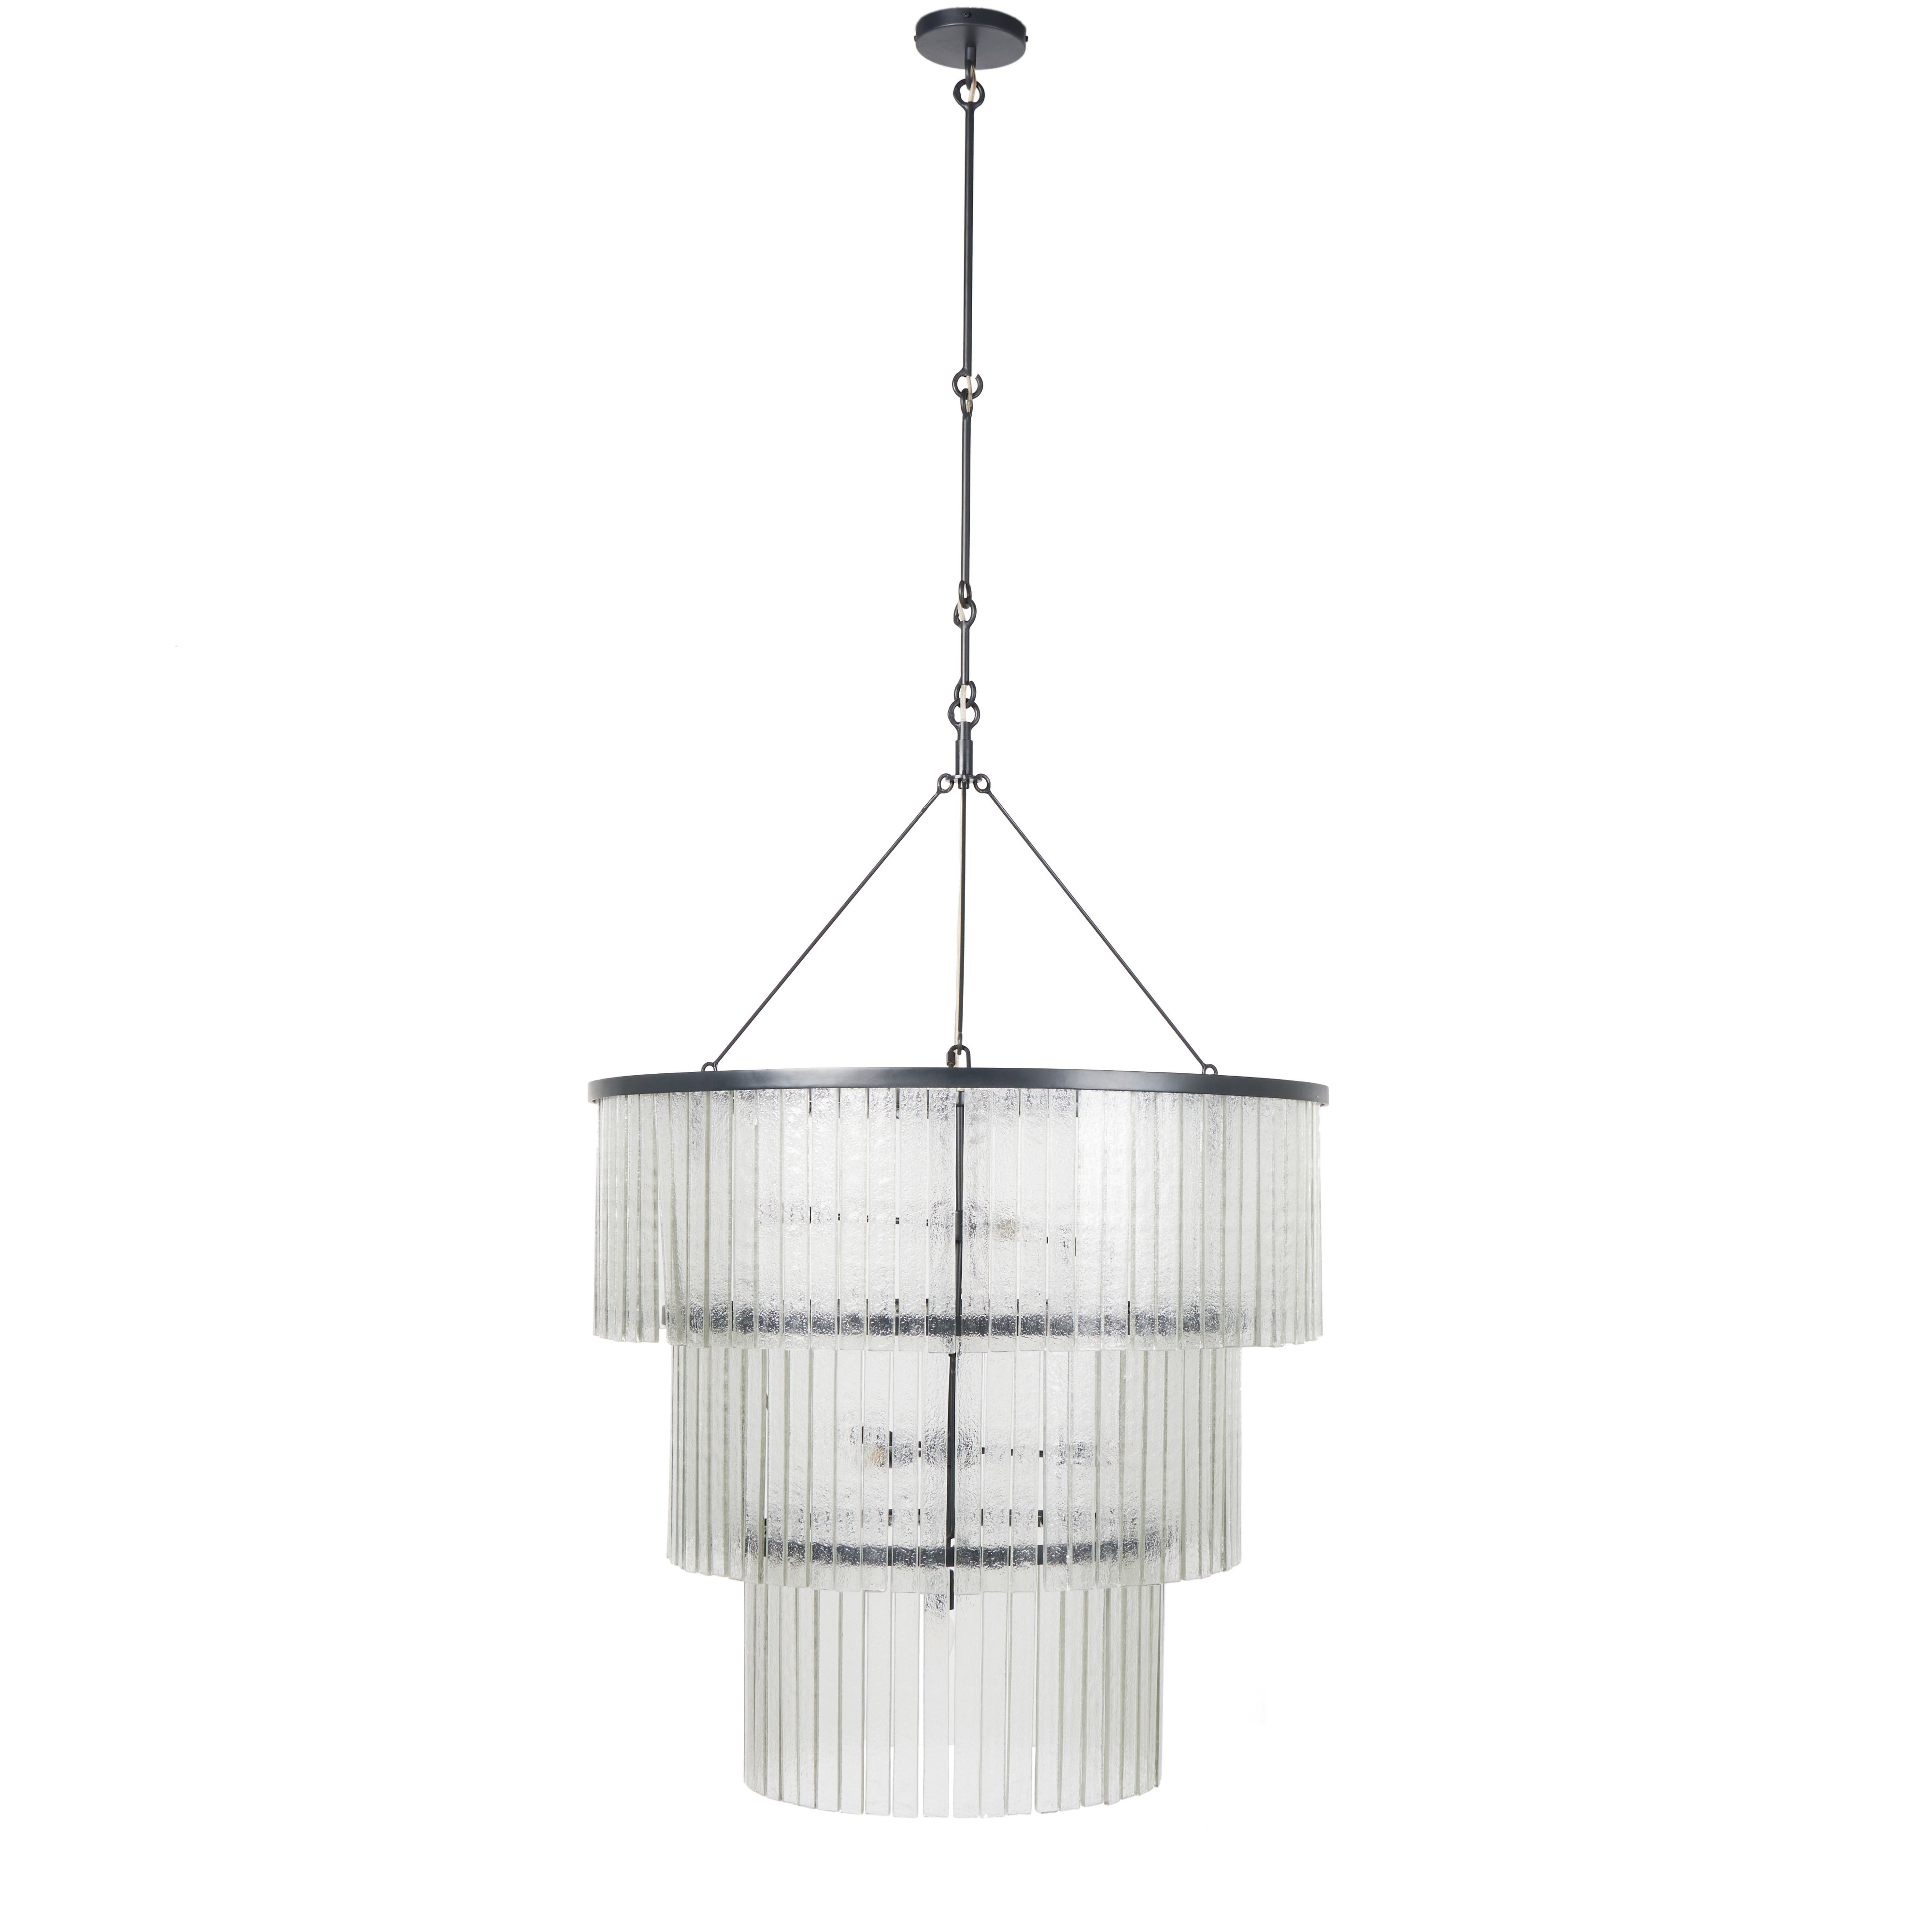 Meredith Large Chandelier-Clr Txt Glass - Image 0